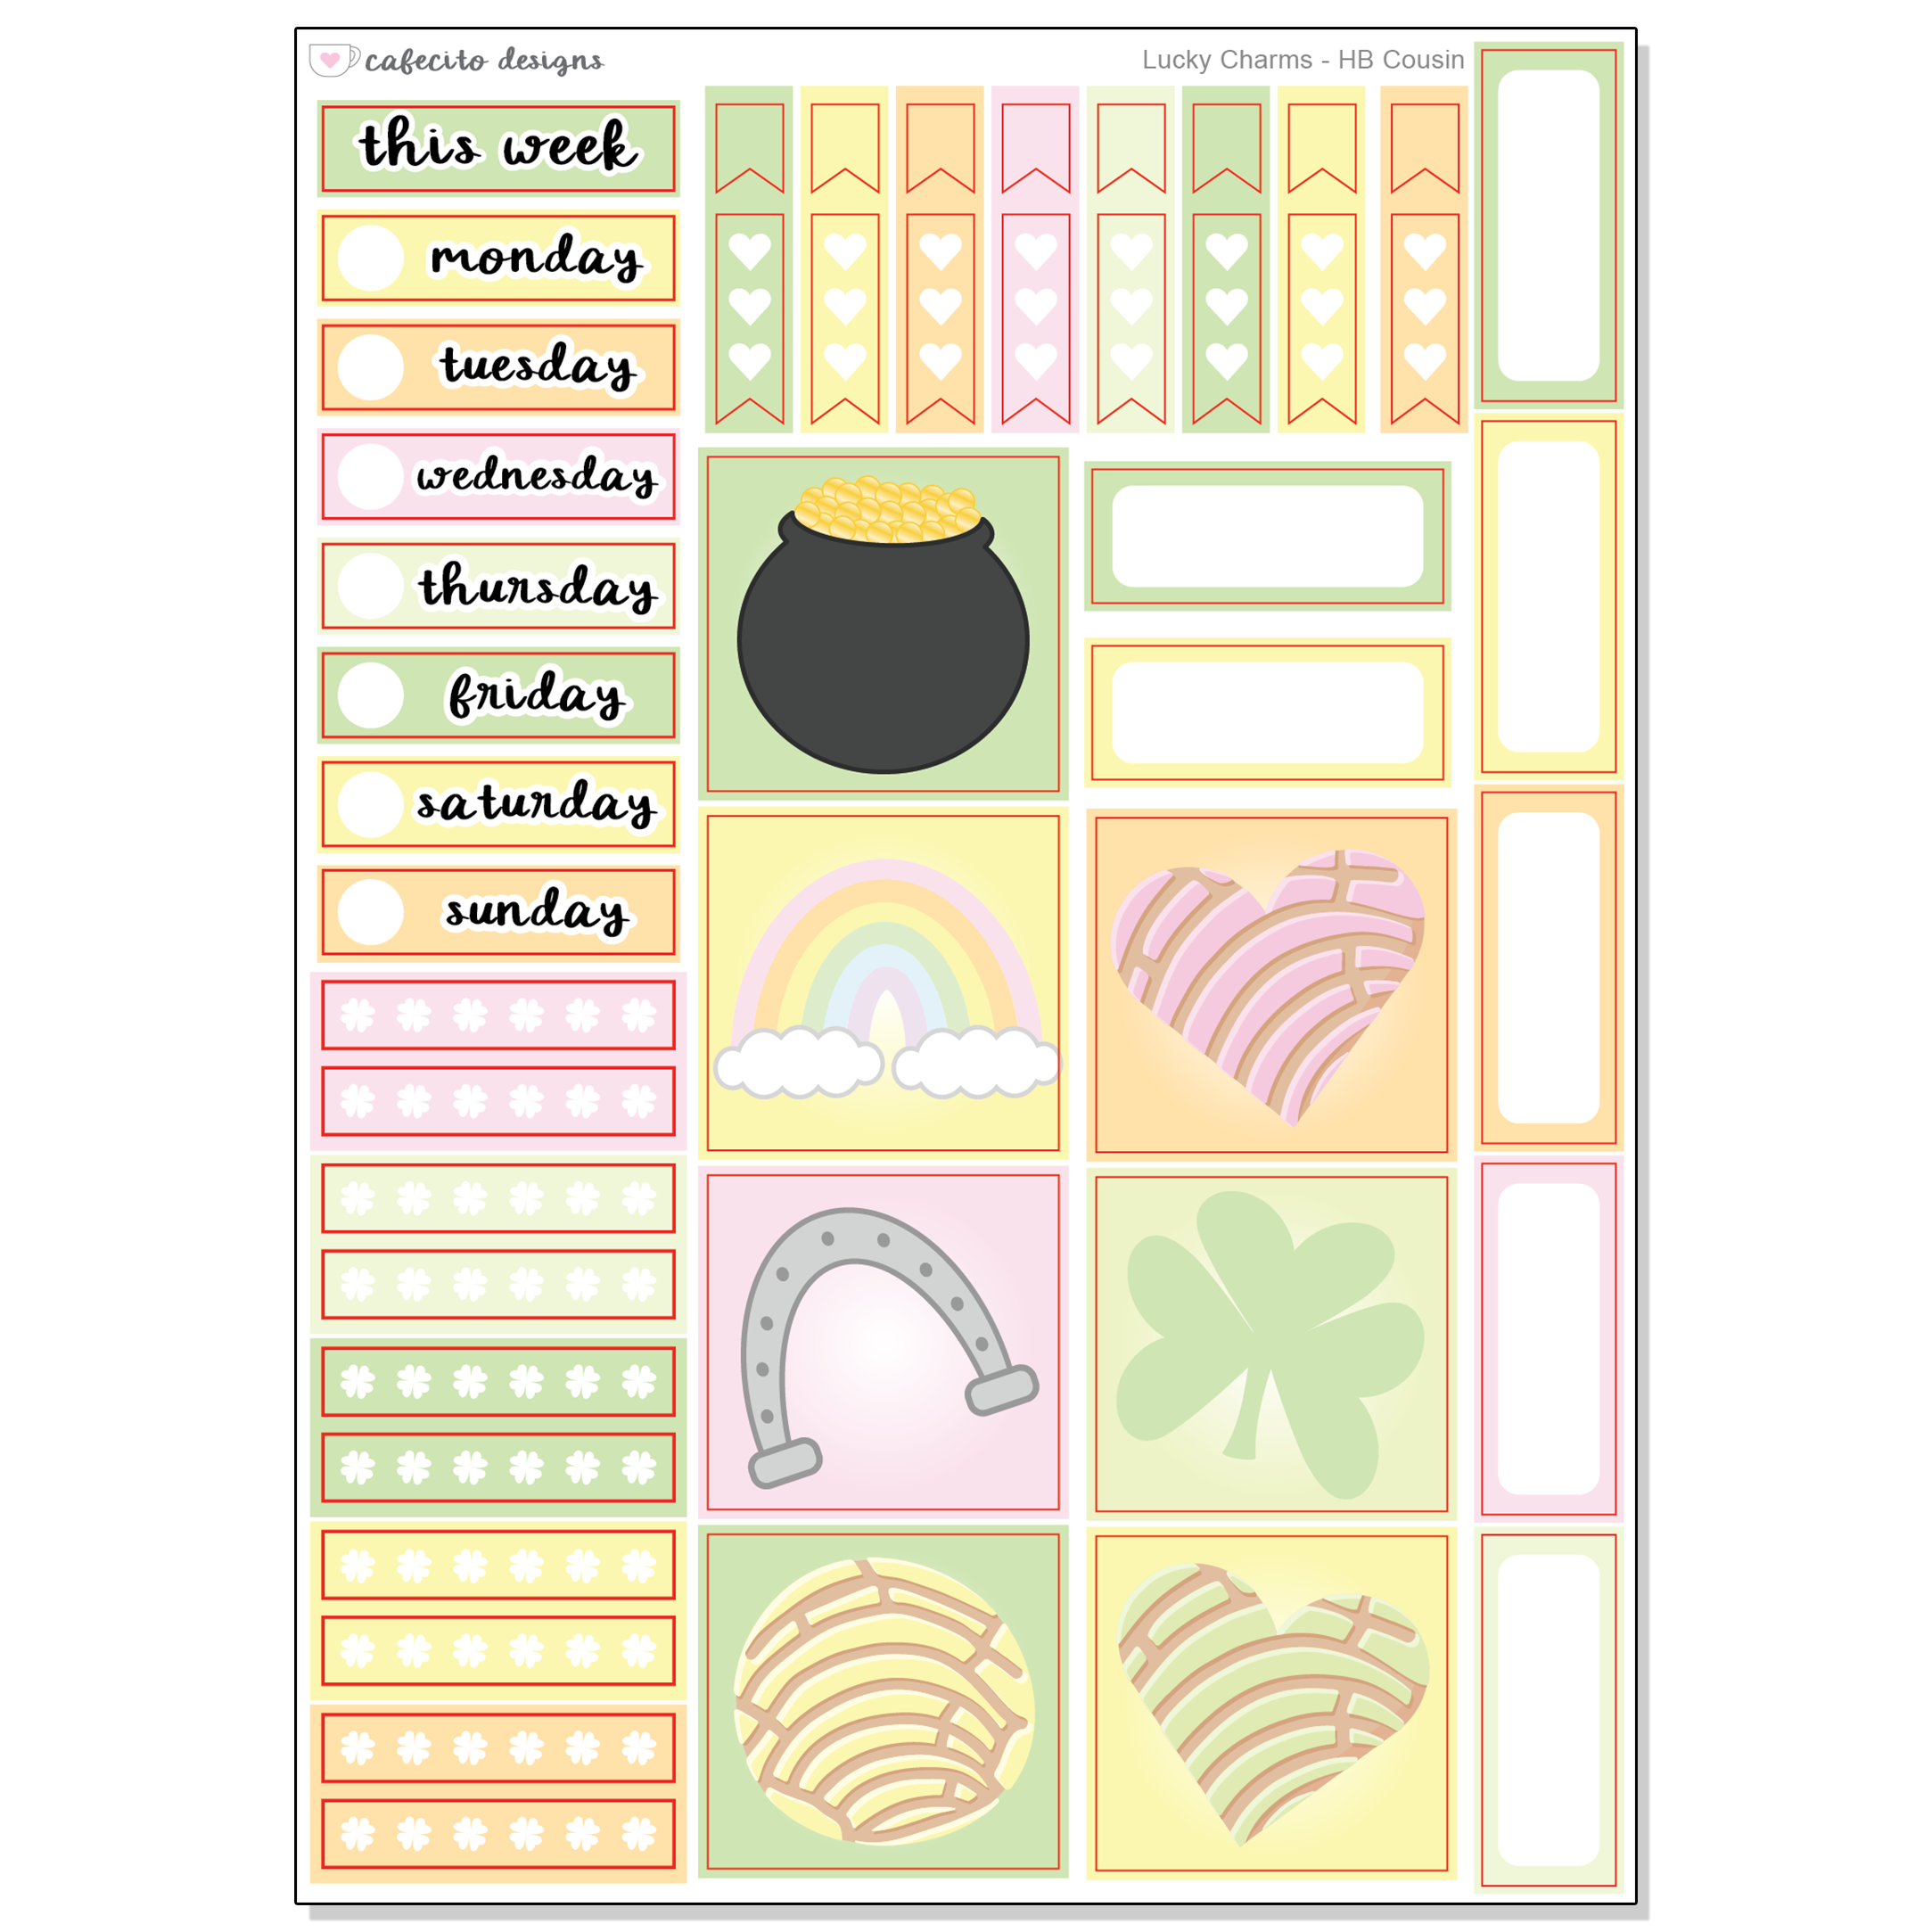 Lucky Charms - Hobonichi COUSIN Functional Stickers